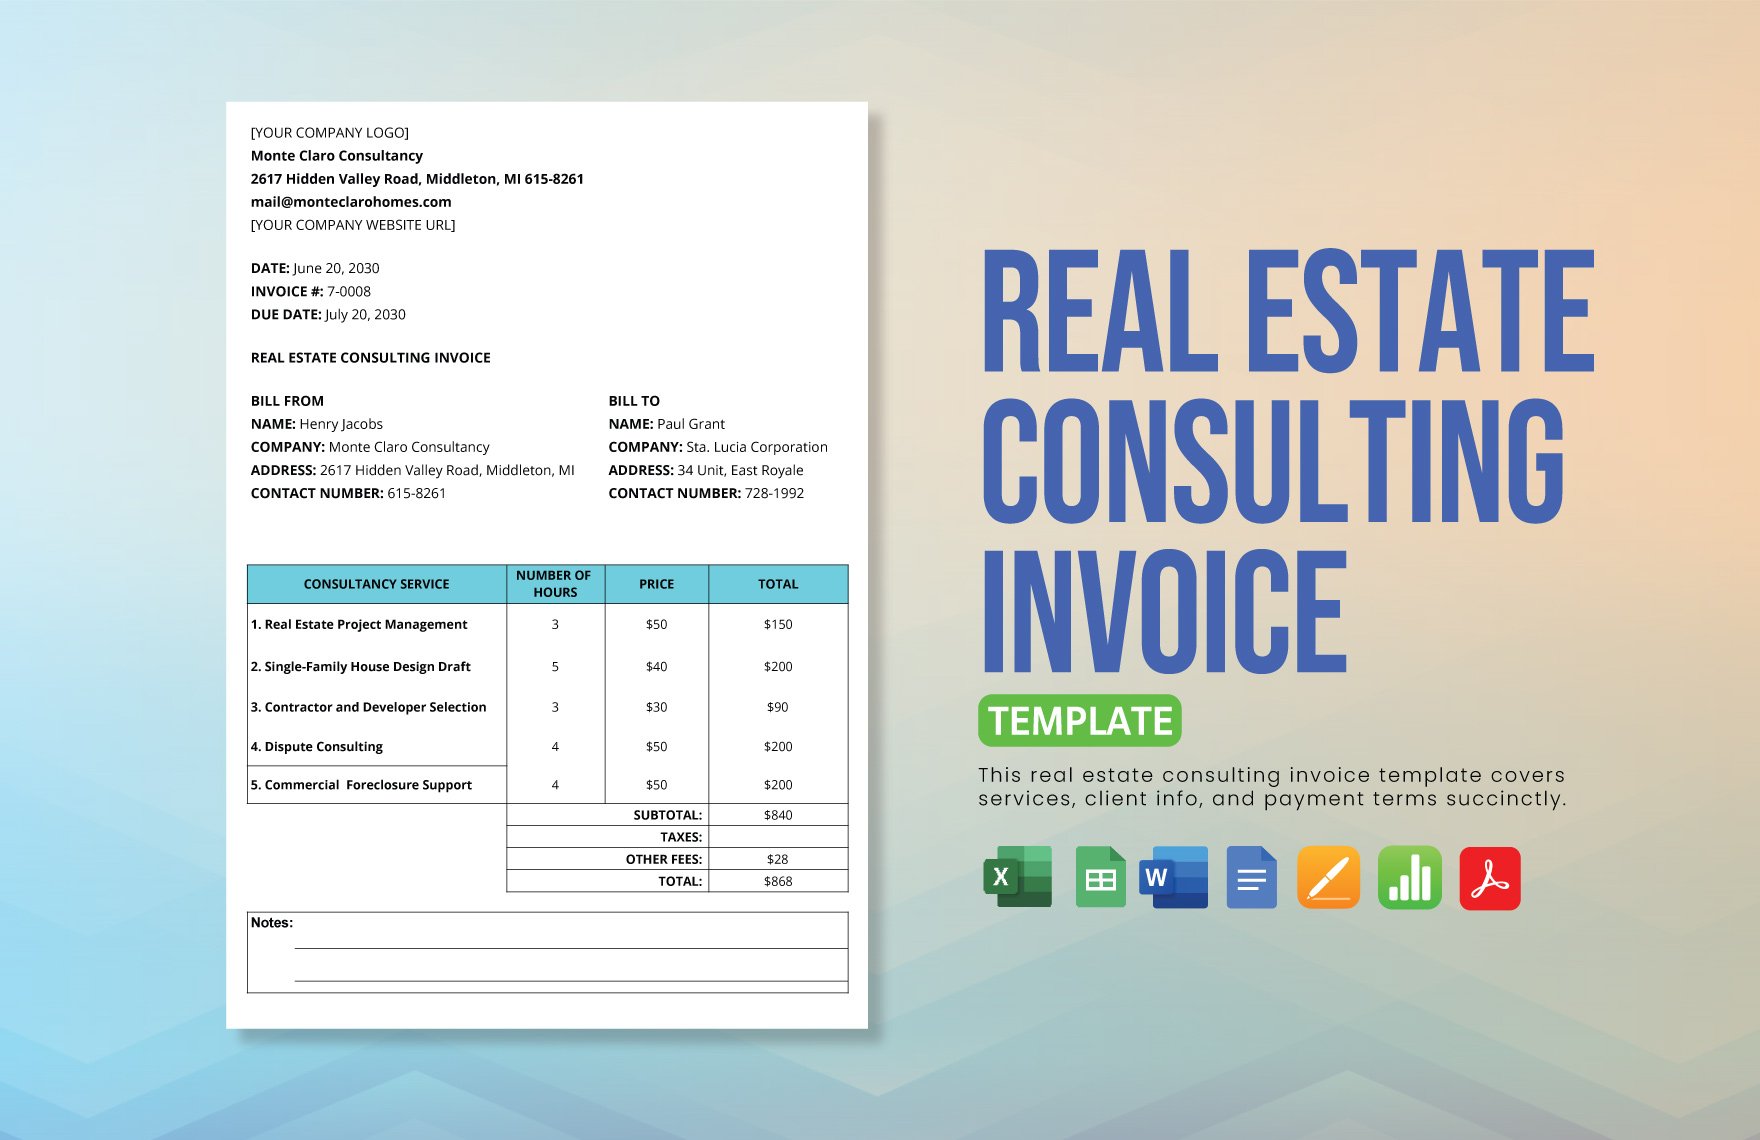 Free Real Estate Consulting Invoice Template in Word, Google Docs, Excel, Google Sheets, Apple Pages, Apple Numbers